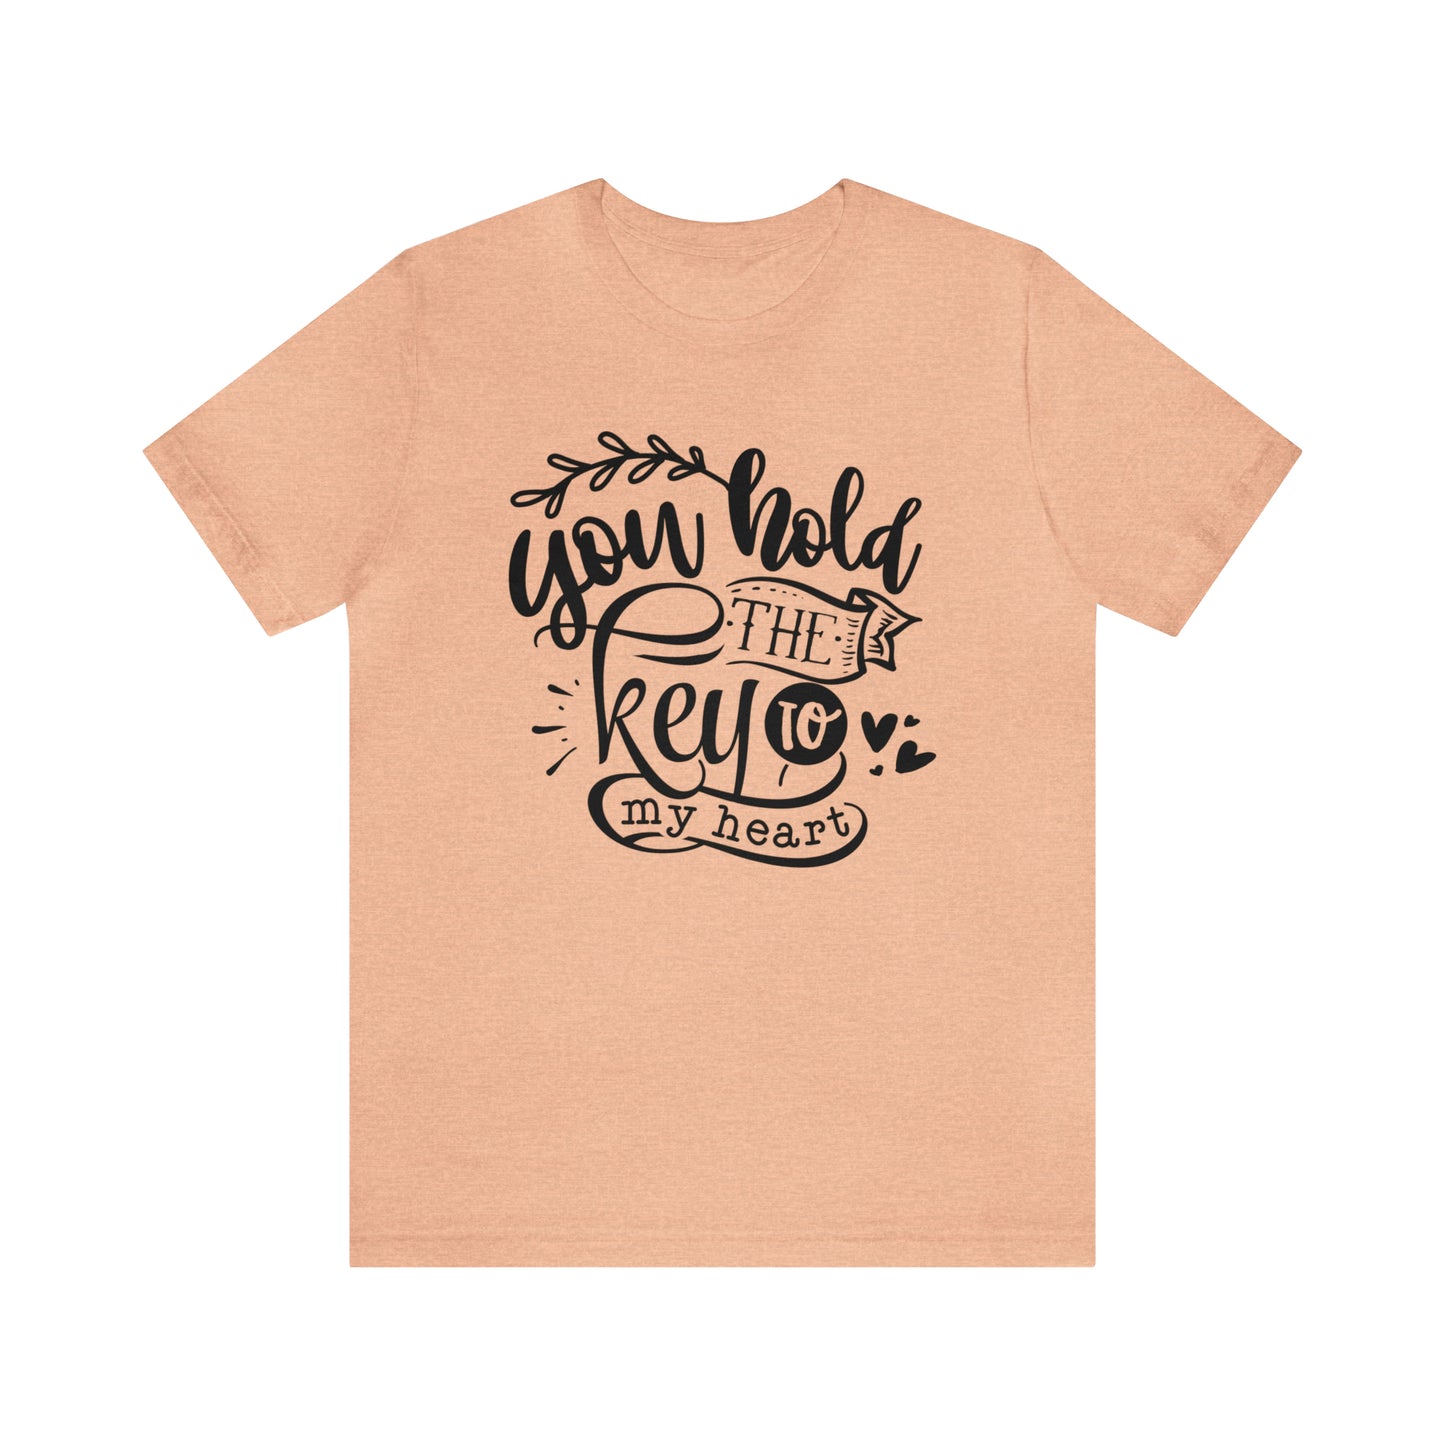 You hold the key to my heart  Short Sleeve Women's Tee